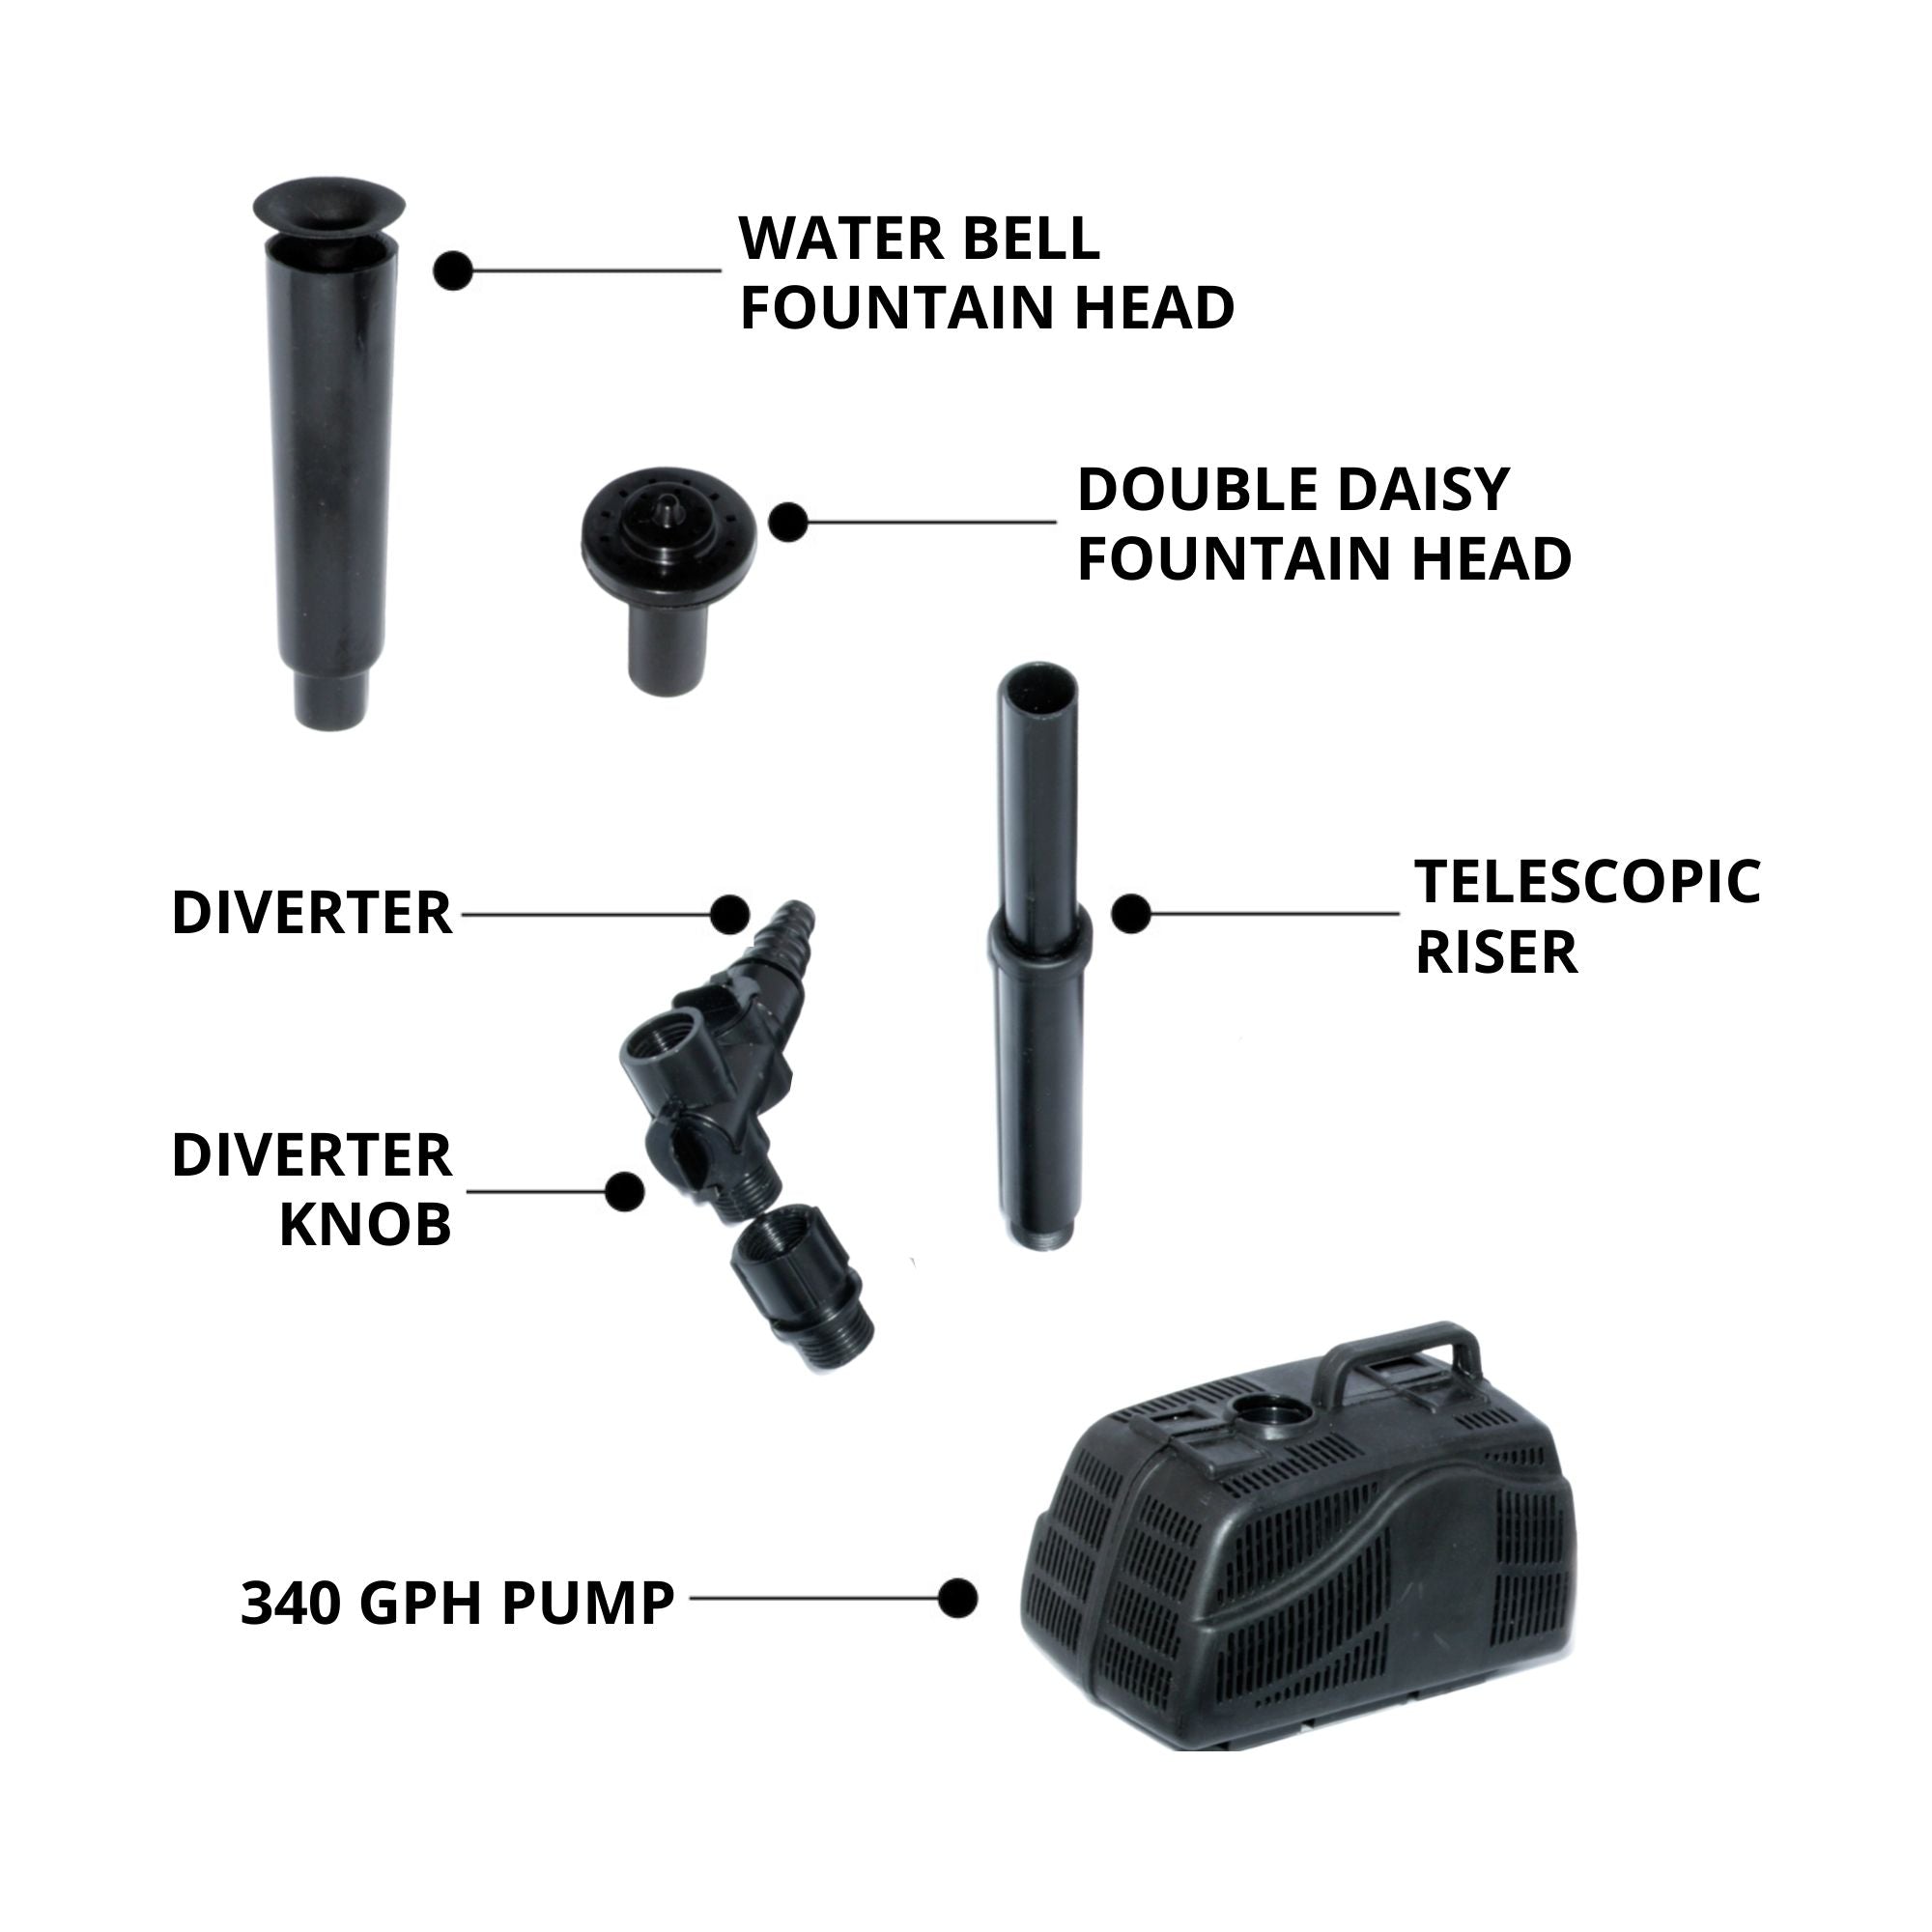 Product shot of disassembled pump parts on a white background, labeled: water bell fountain head; double daisy fountain head; telescopic riser; diverter; diverter knob; 340 GPH pump